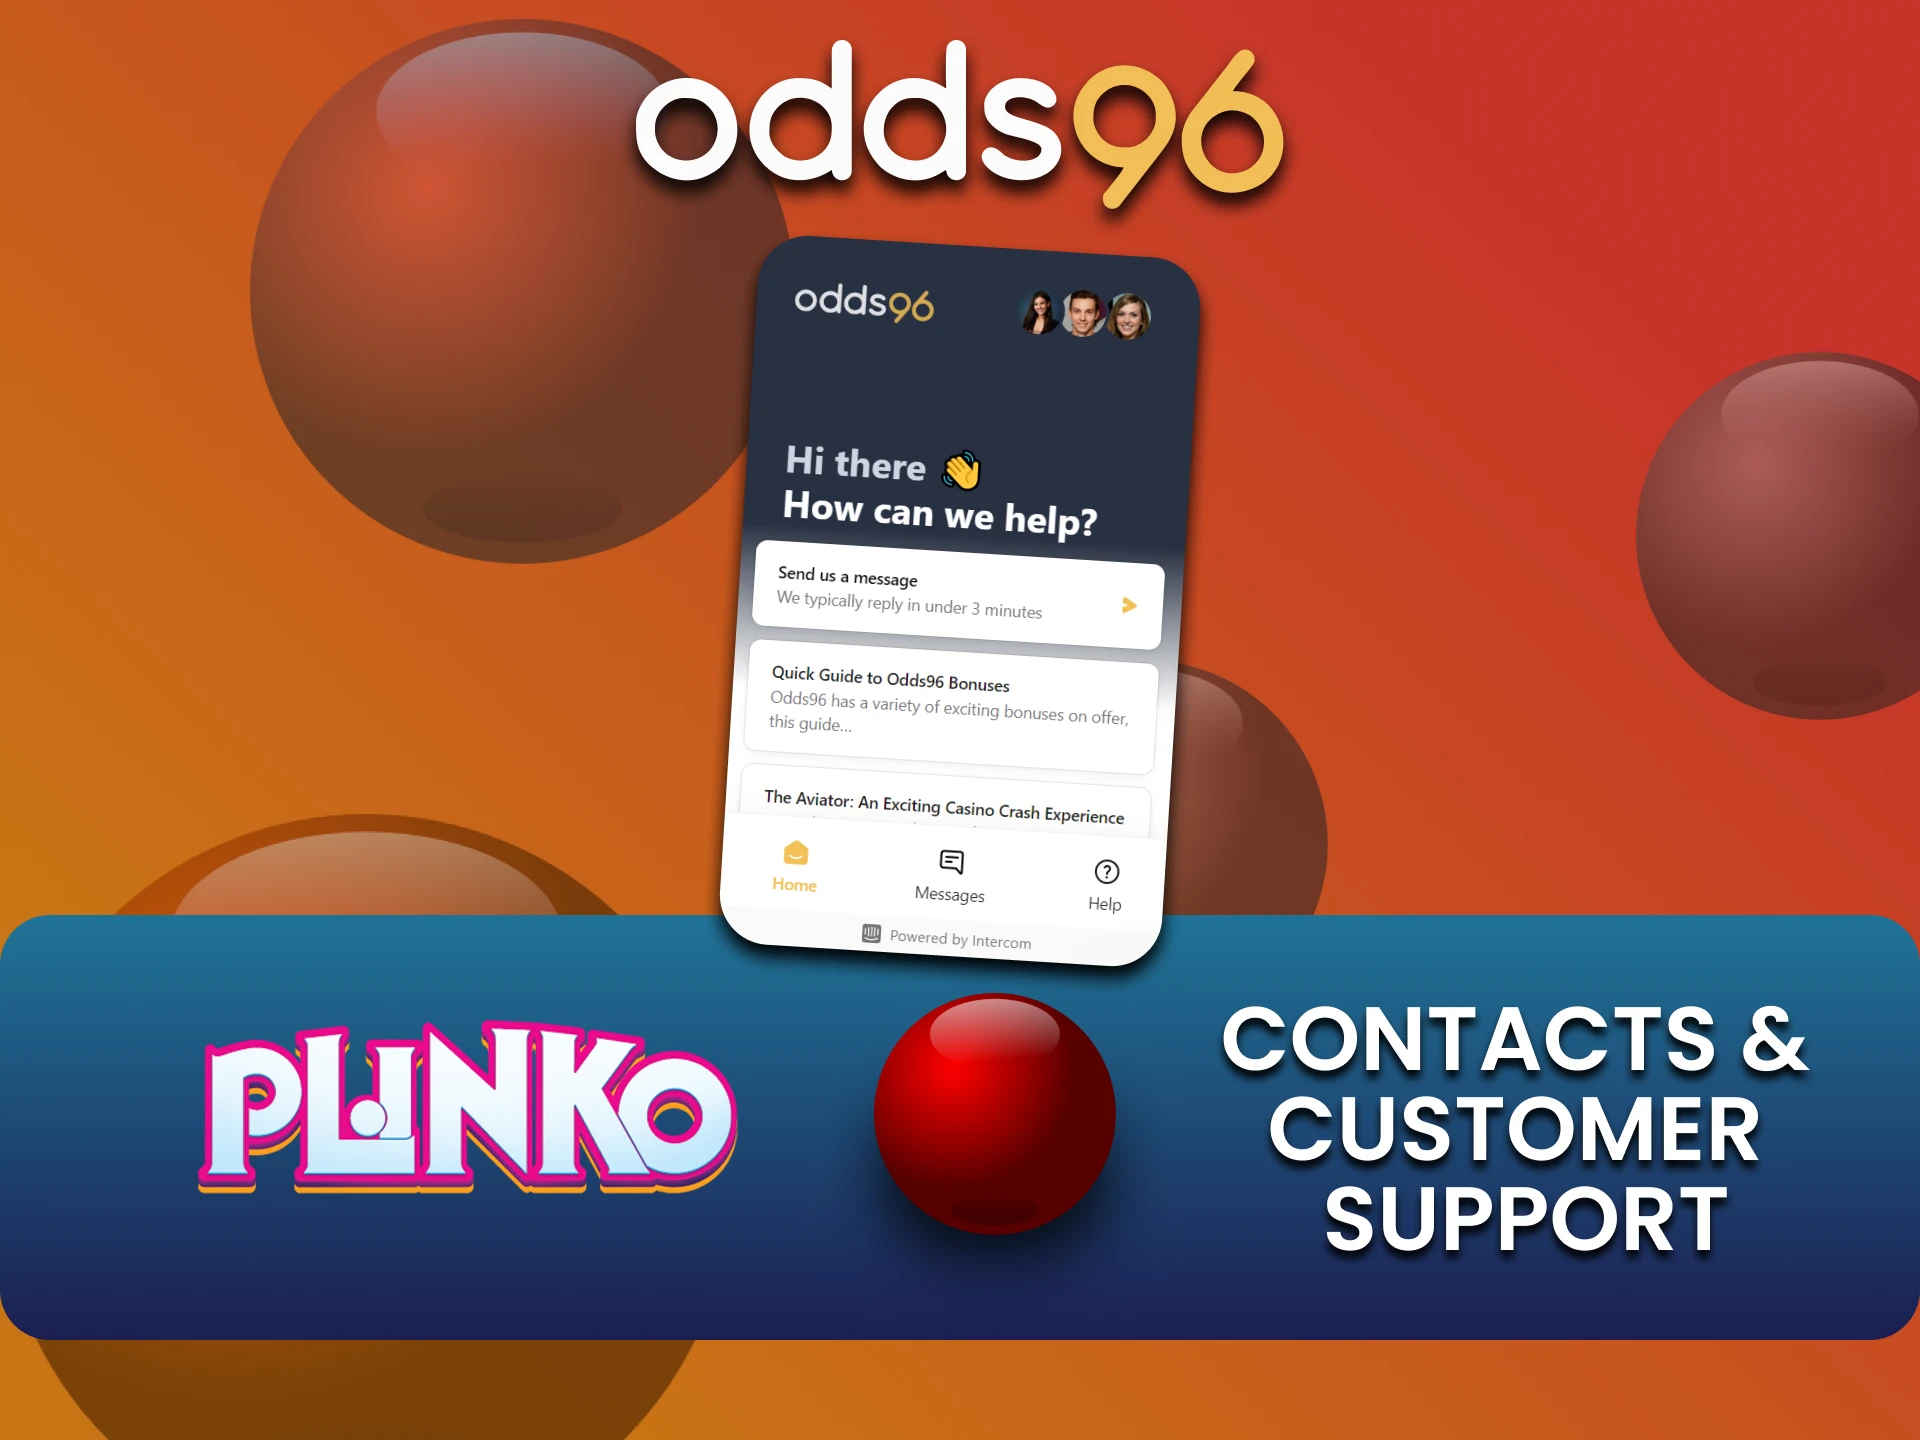 We will tell you how to contact the odds96 team.